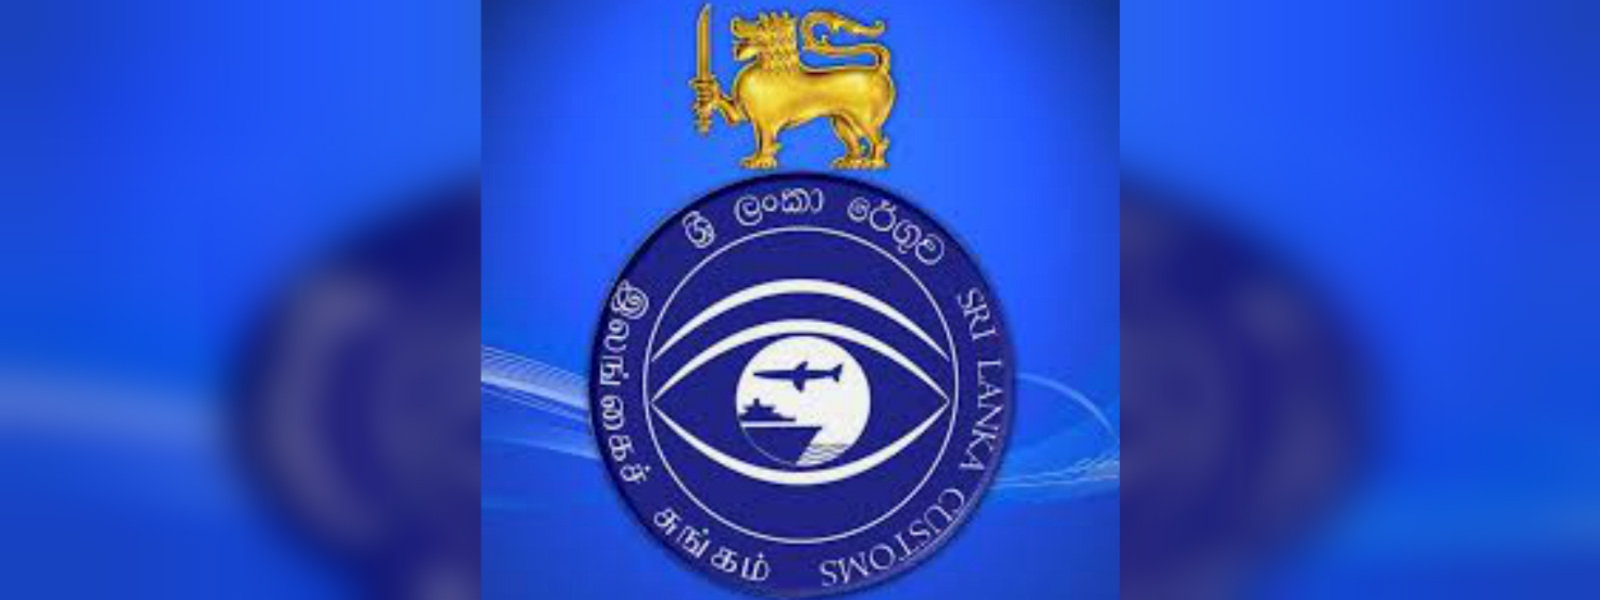 SL Customs to intensify trade union action 